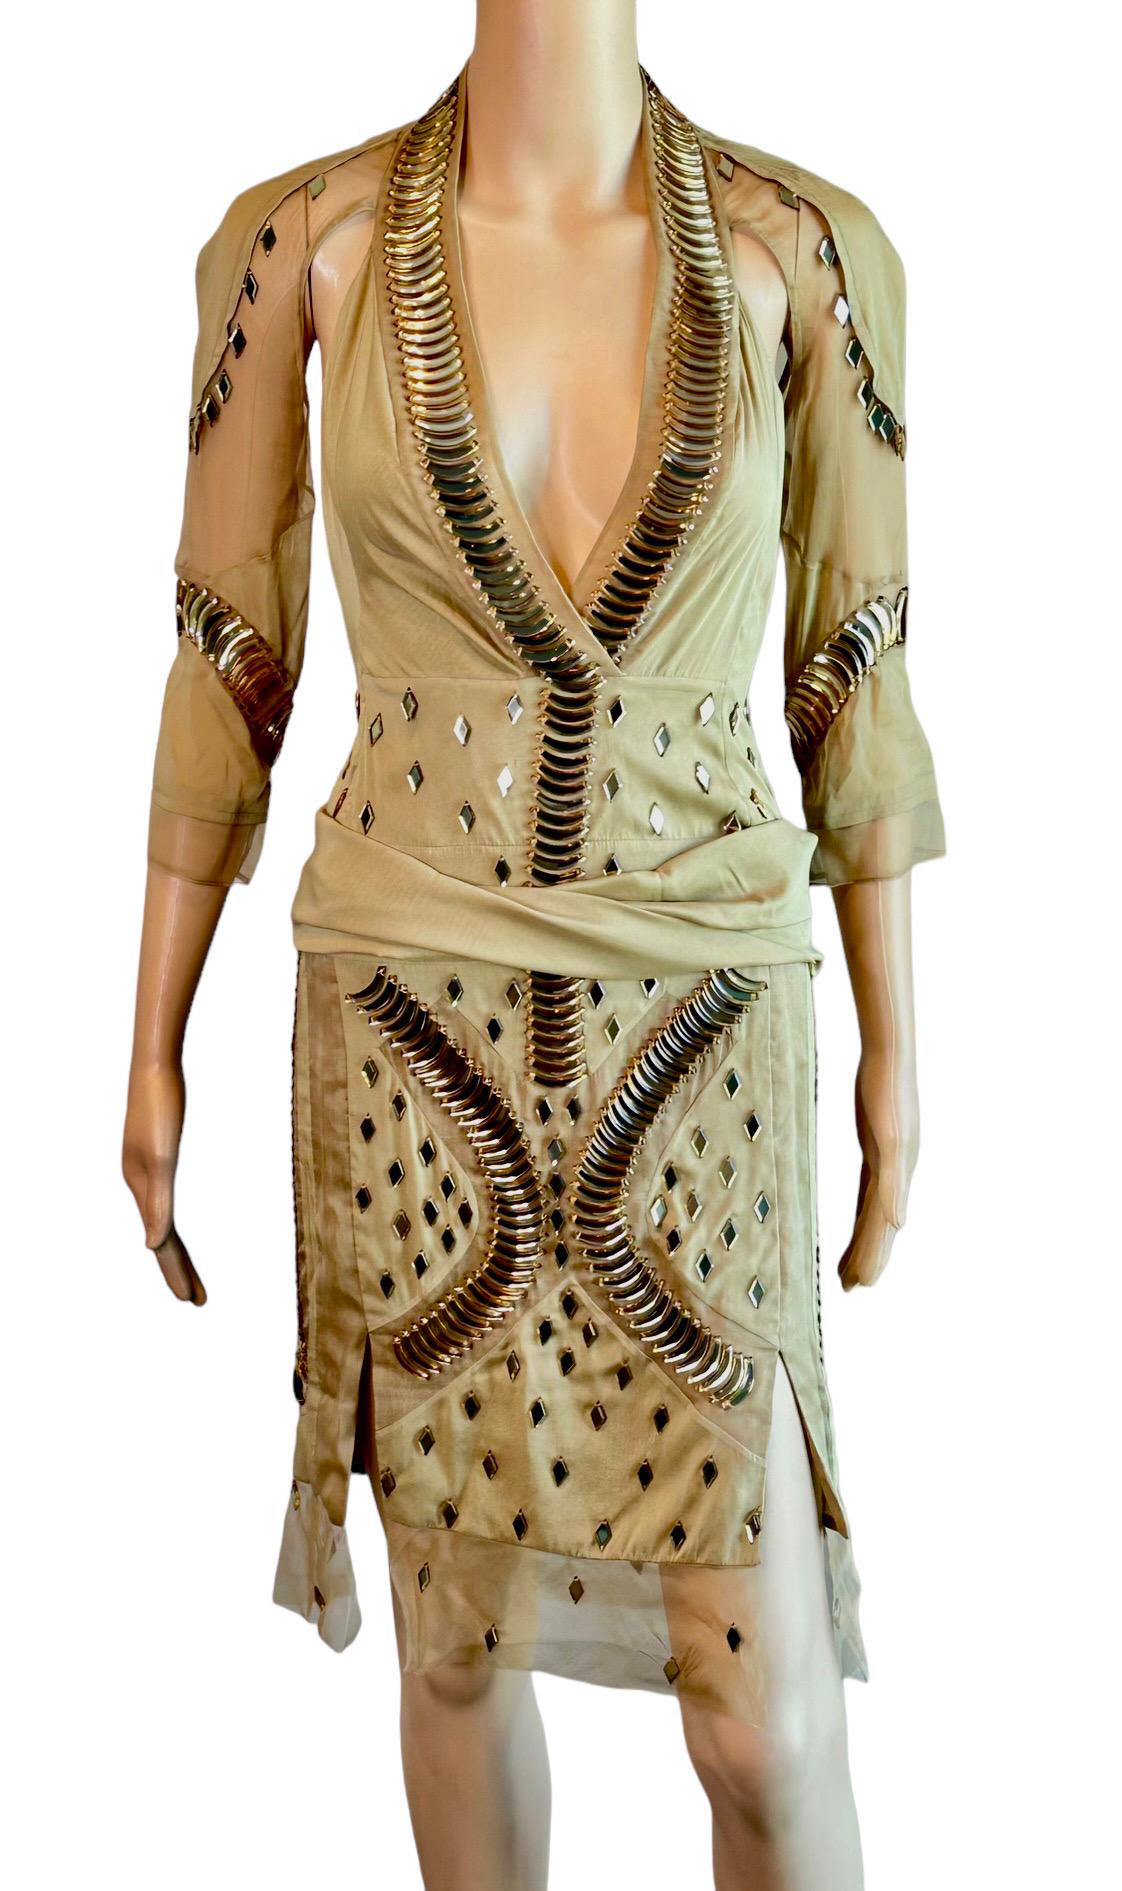 Gucci S/S 2005 Runway Embellished Sheer Plunging Neckline Cutout Back Mini Dress 7